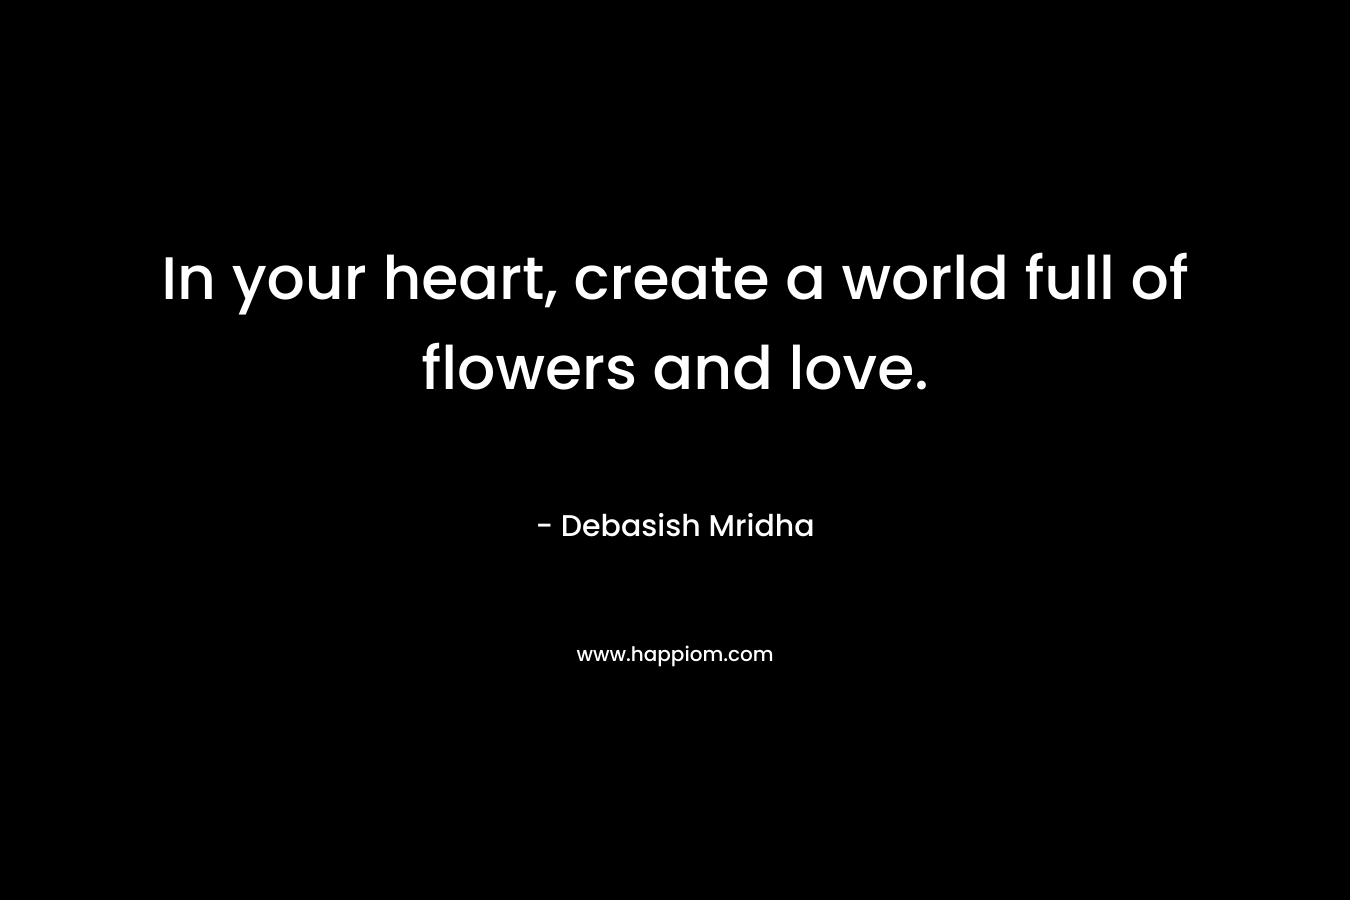 In your heart, create a world full of flowers and love.